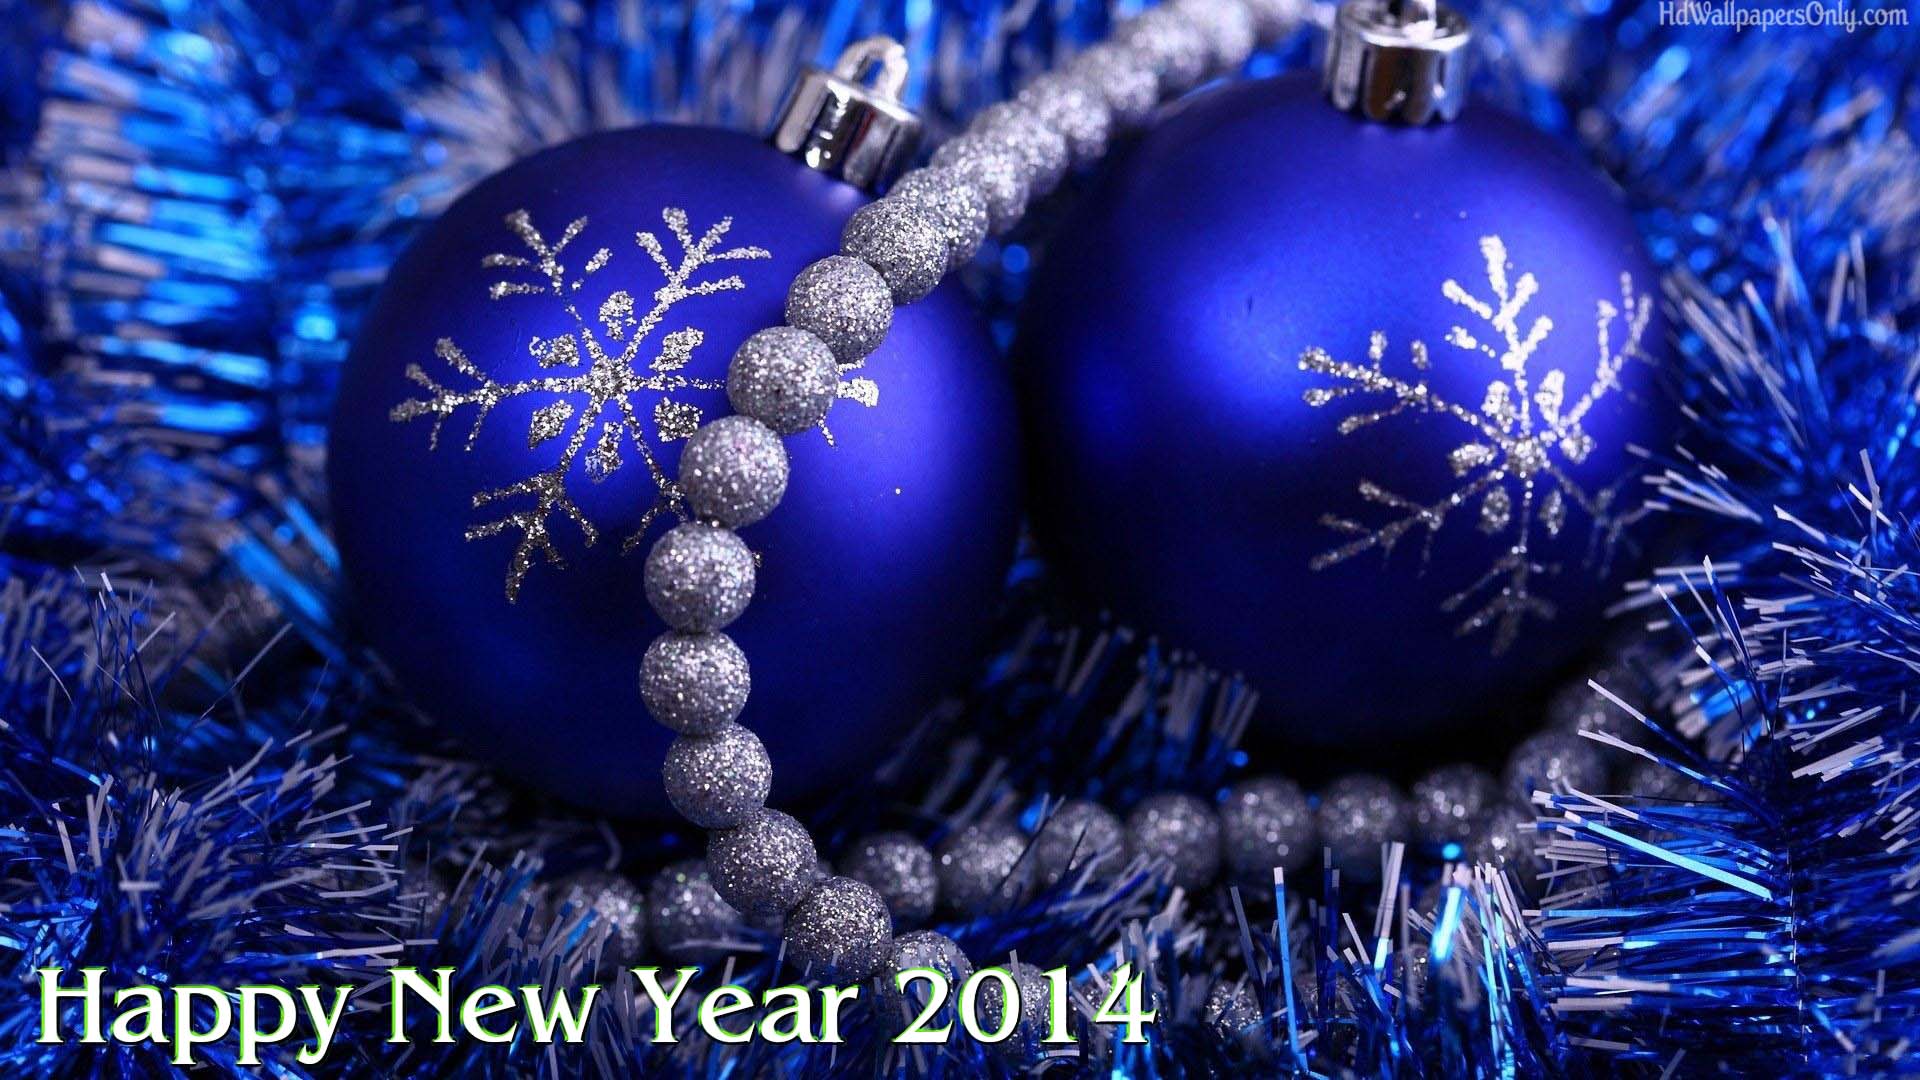 high resolution 1920x1080 Happy New Year 2014 Marry Christmast